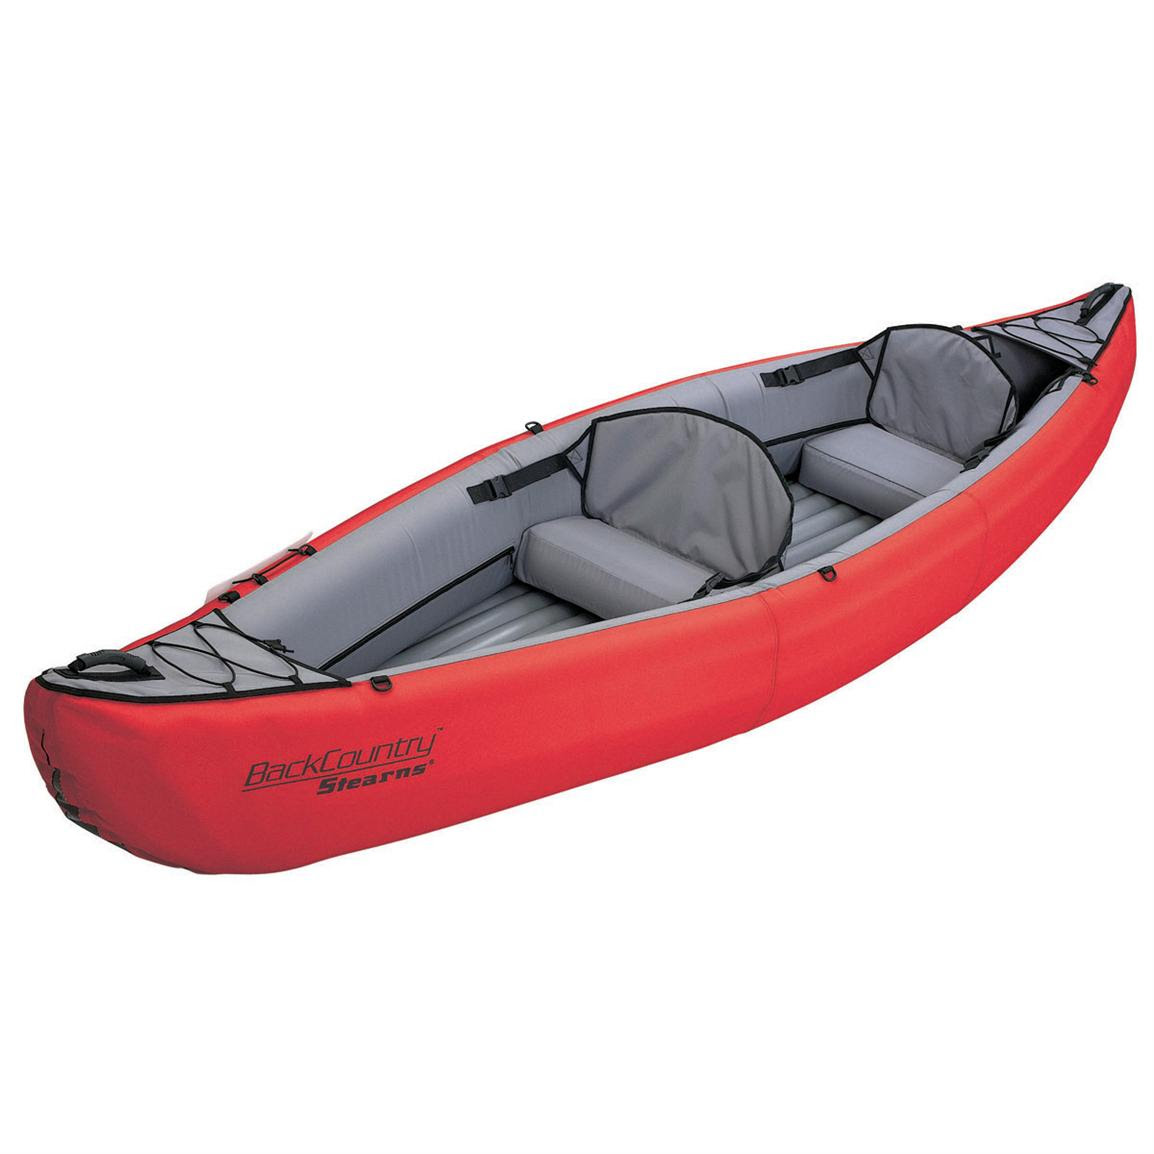 stearns® back country inflatable canoe - 110323, canoes